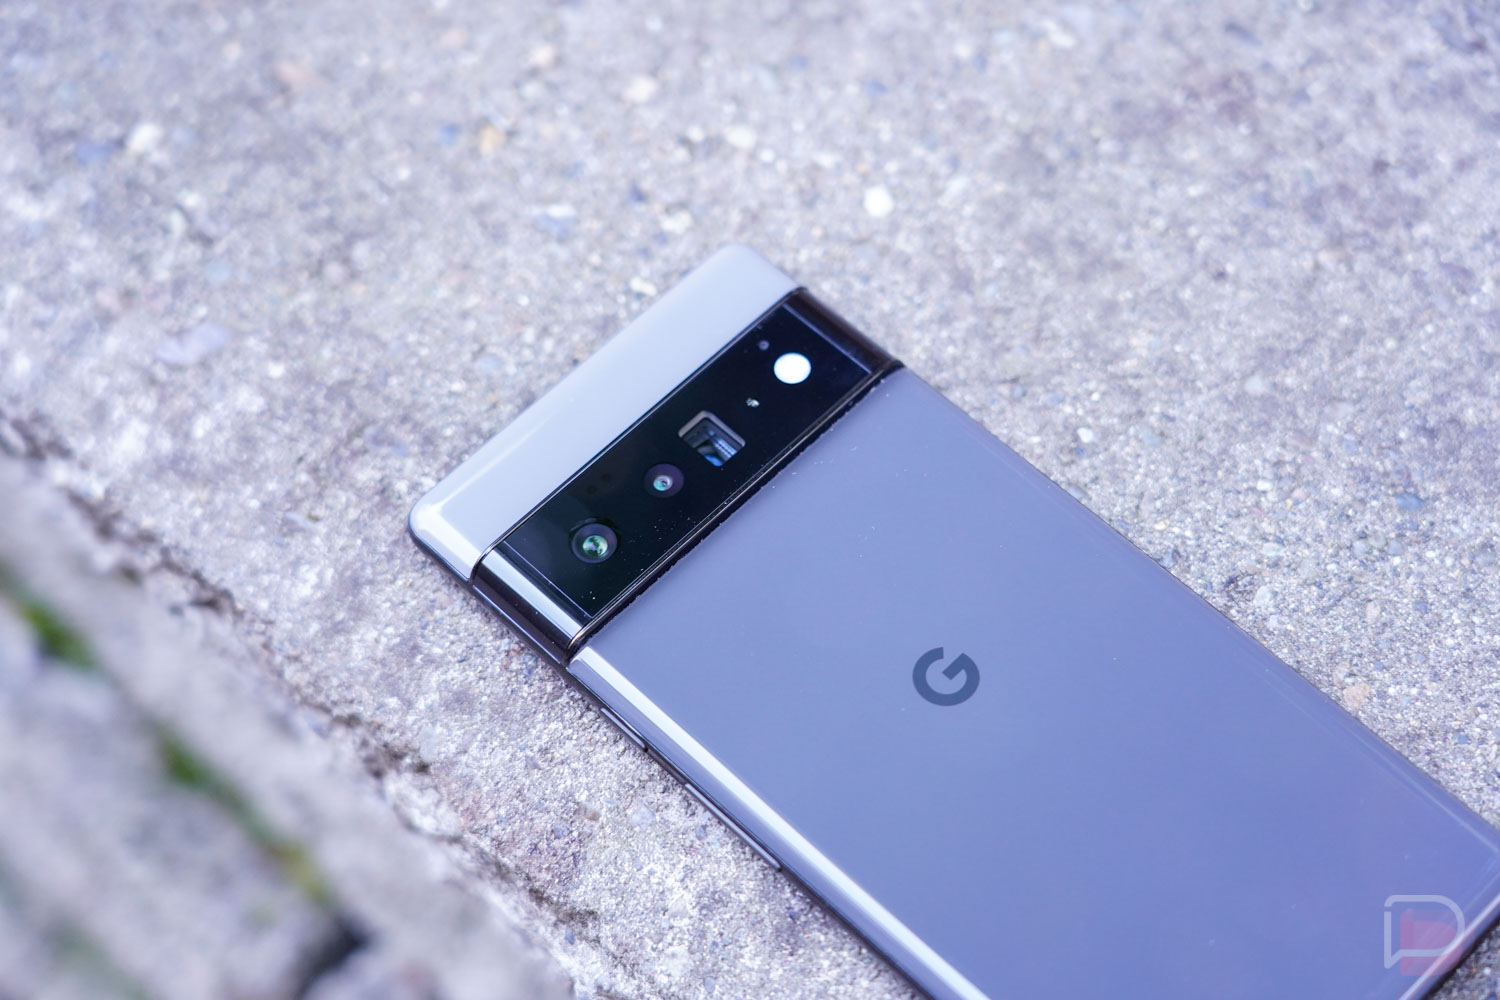 Pixel 6 and 6 pro review: Are the new Google phones worth buying